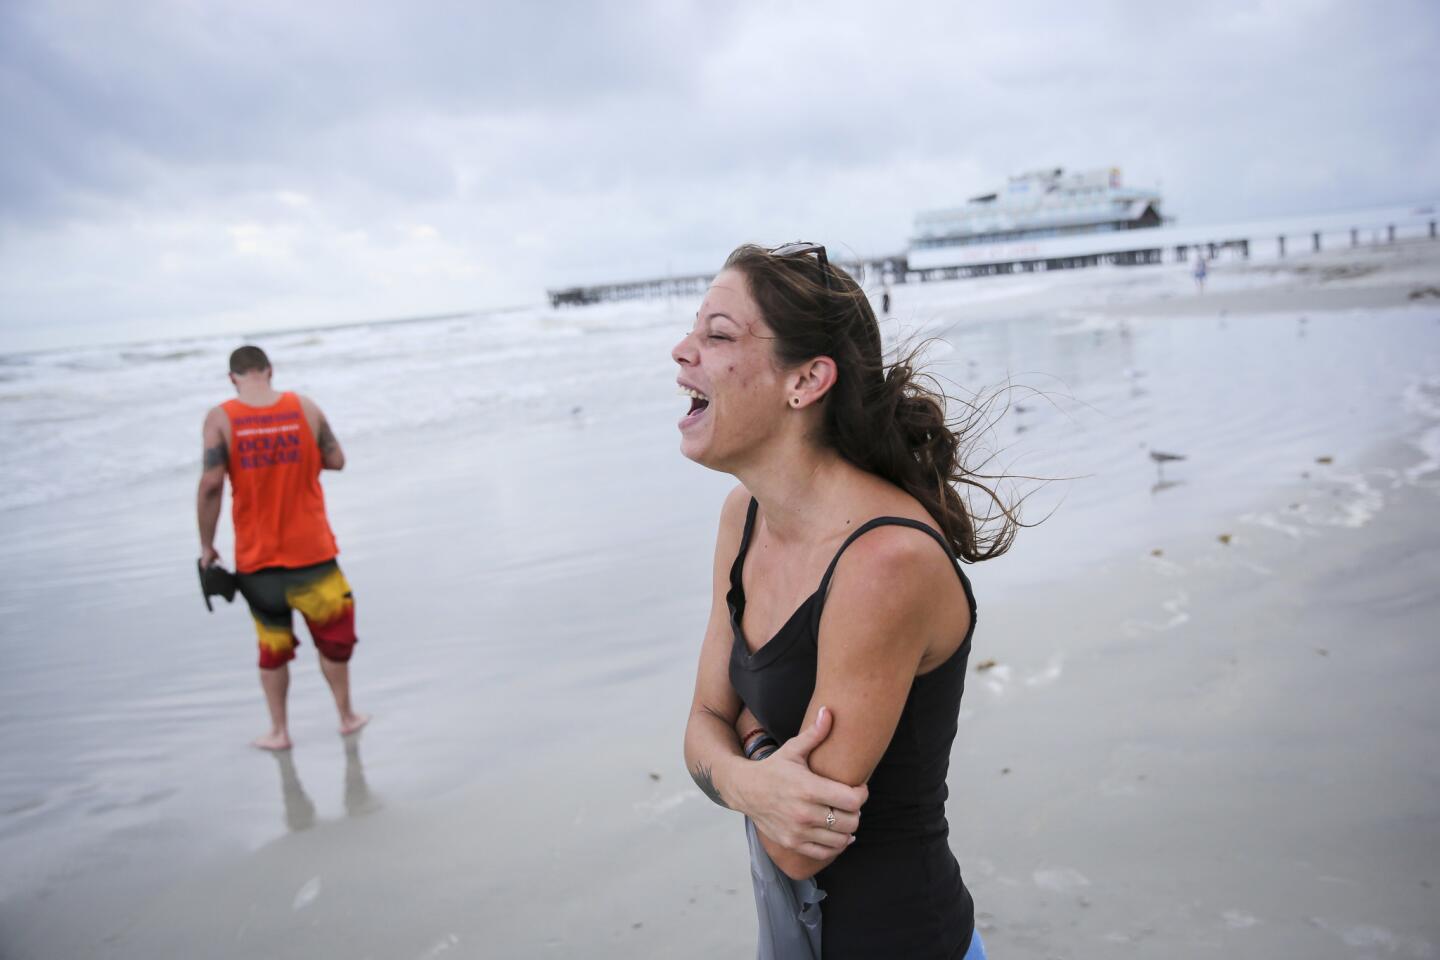 Emily Vulpi, 29, laughs as the winds pick up as she walks along the beach with Ryan Bell, 28, ahead of Hurricane Matthew in Daytona Beach, Fla. on Thursday, Oct. 6, 2016. Matthew steamed toward Florida with winds of 140 mph Thursday as hundreds of thousands of people across the Southeast boarded up their homes and fled inland to escape the most powerful storm to threaten the Atlantic coast in more than a decade. (Will Vragovic /Tampa Bay Times via AP)